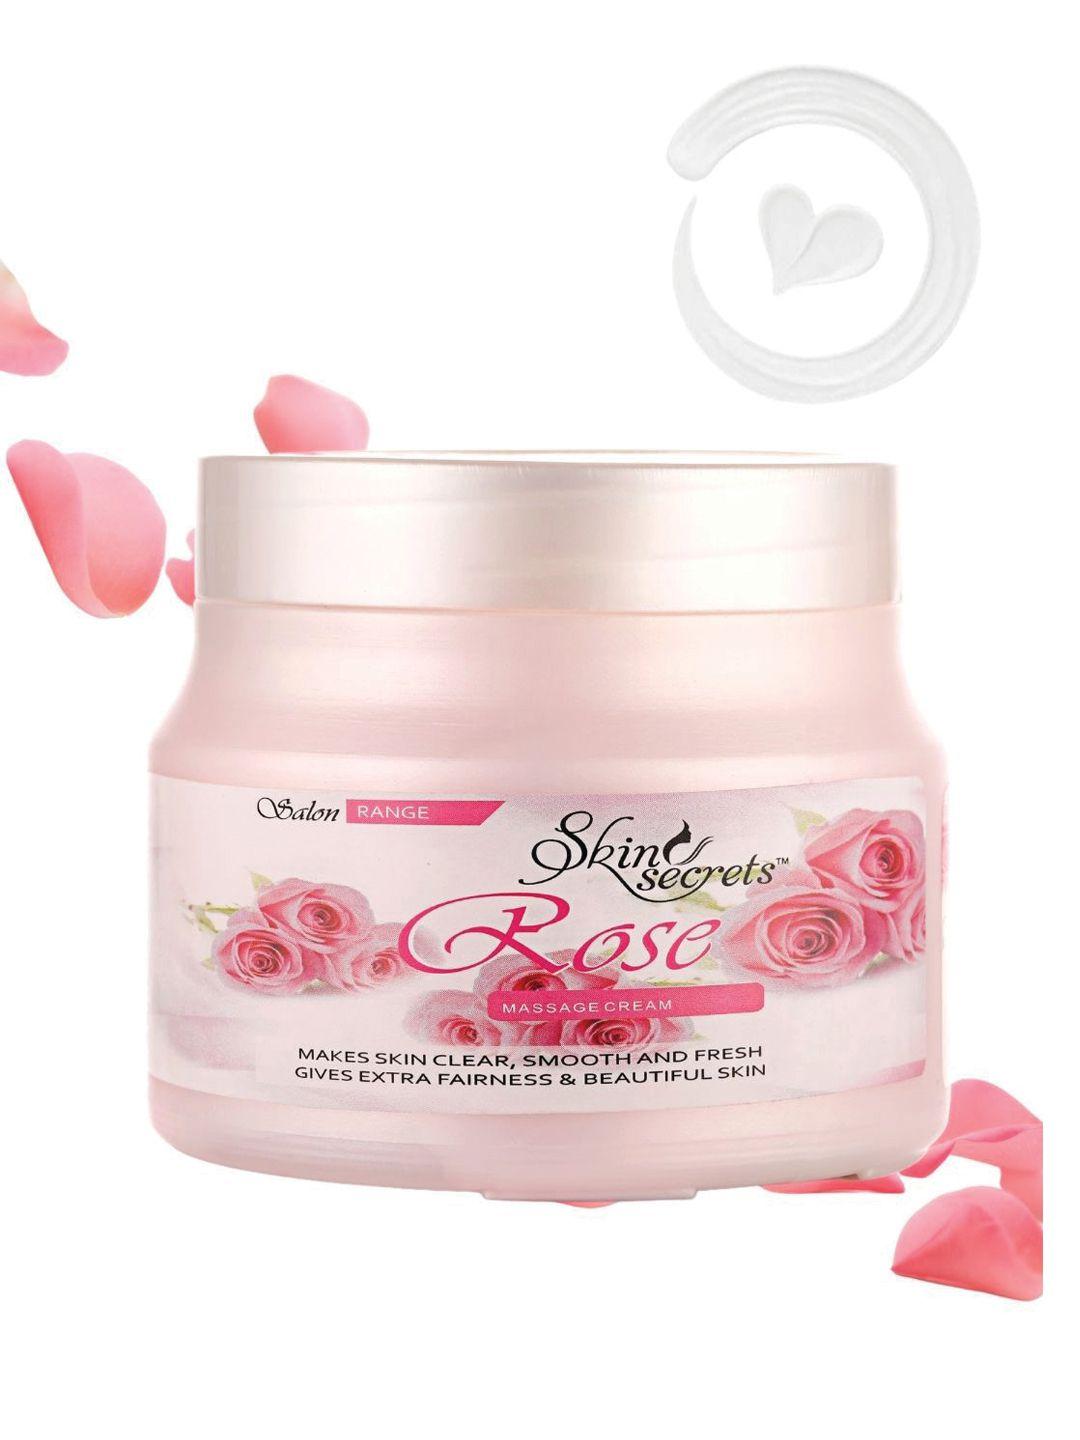 skin secrets cruelty free & non toxic rose massage cream for clear & smooth skin - 500 g